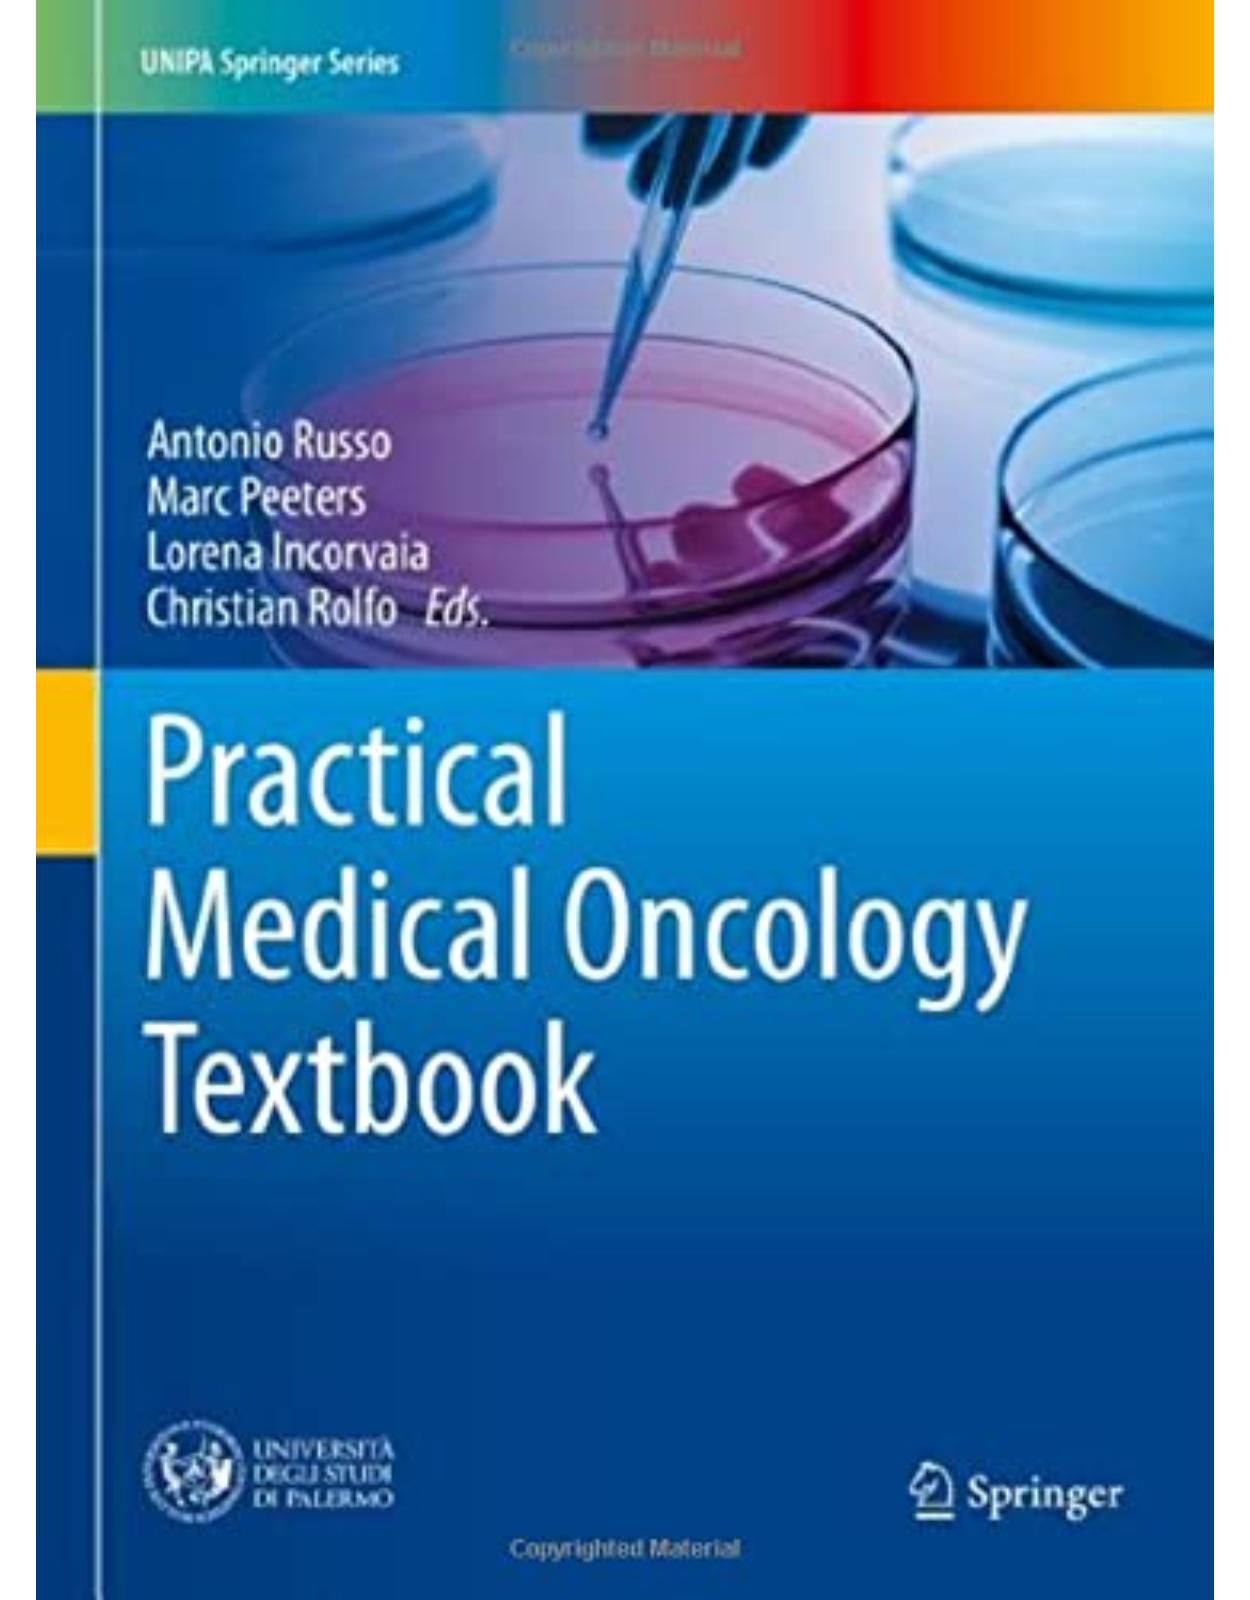 Practical Medical Oncology Textbook 